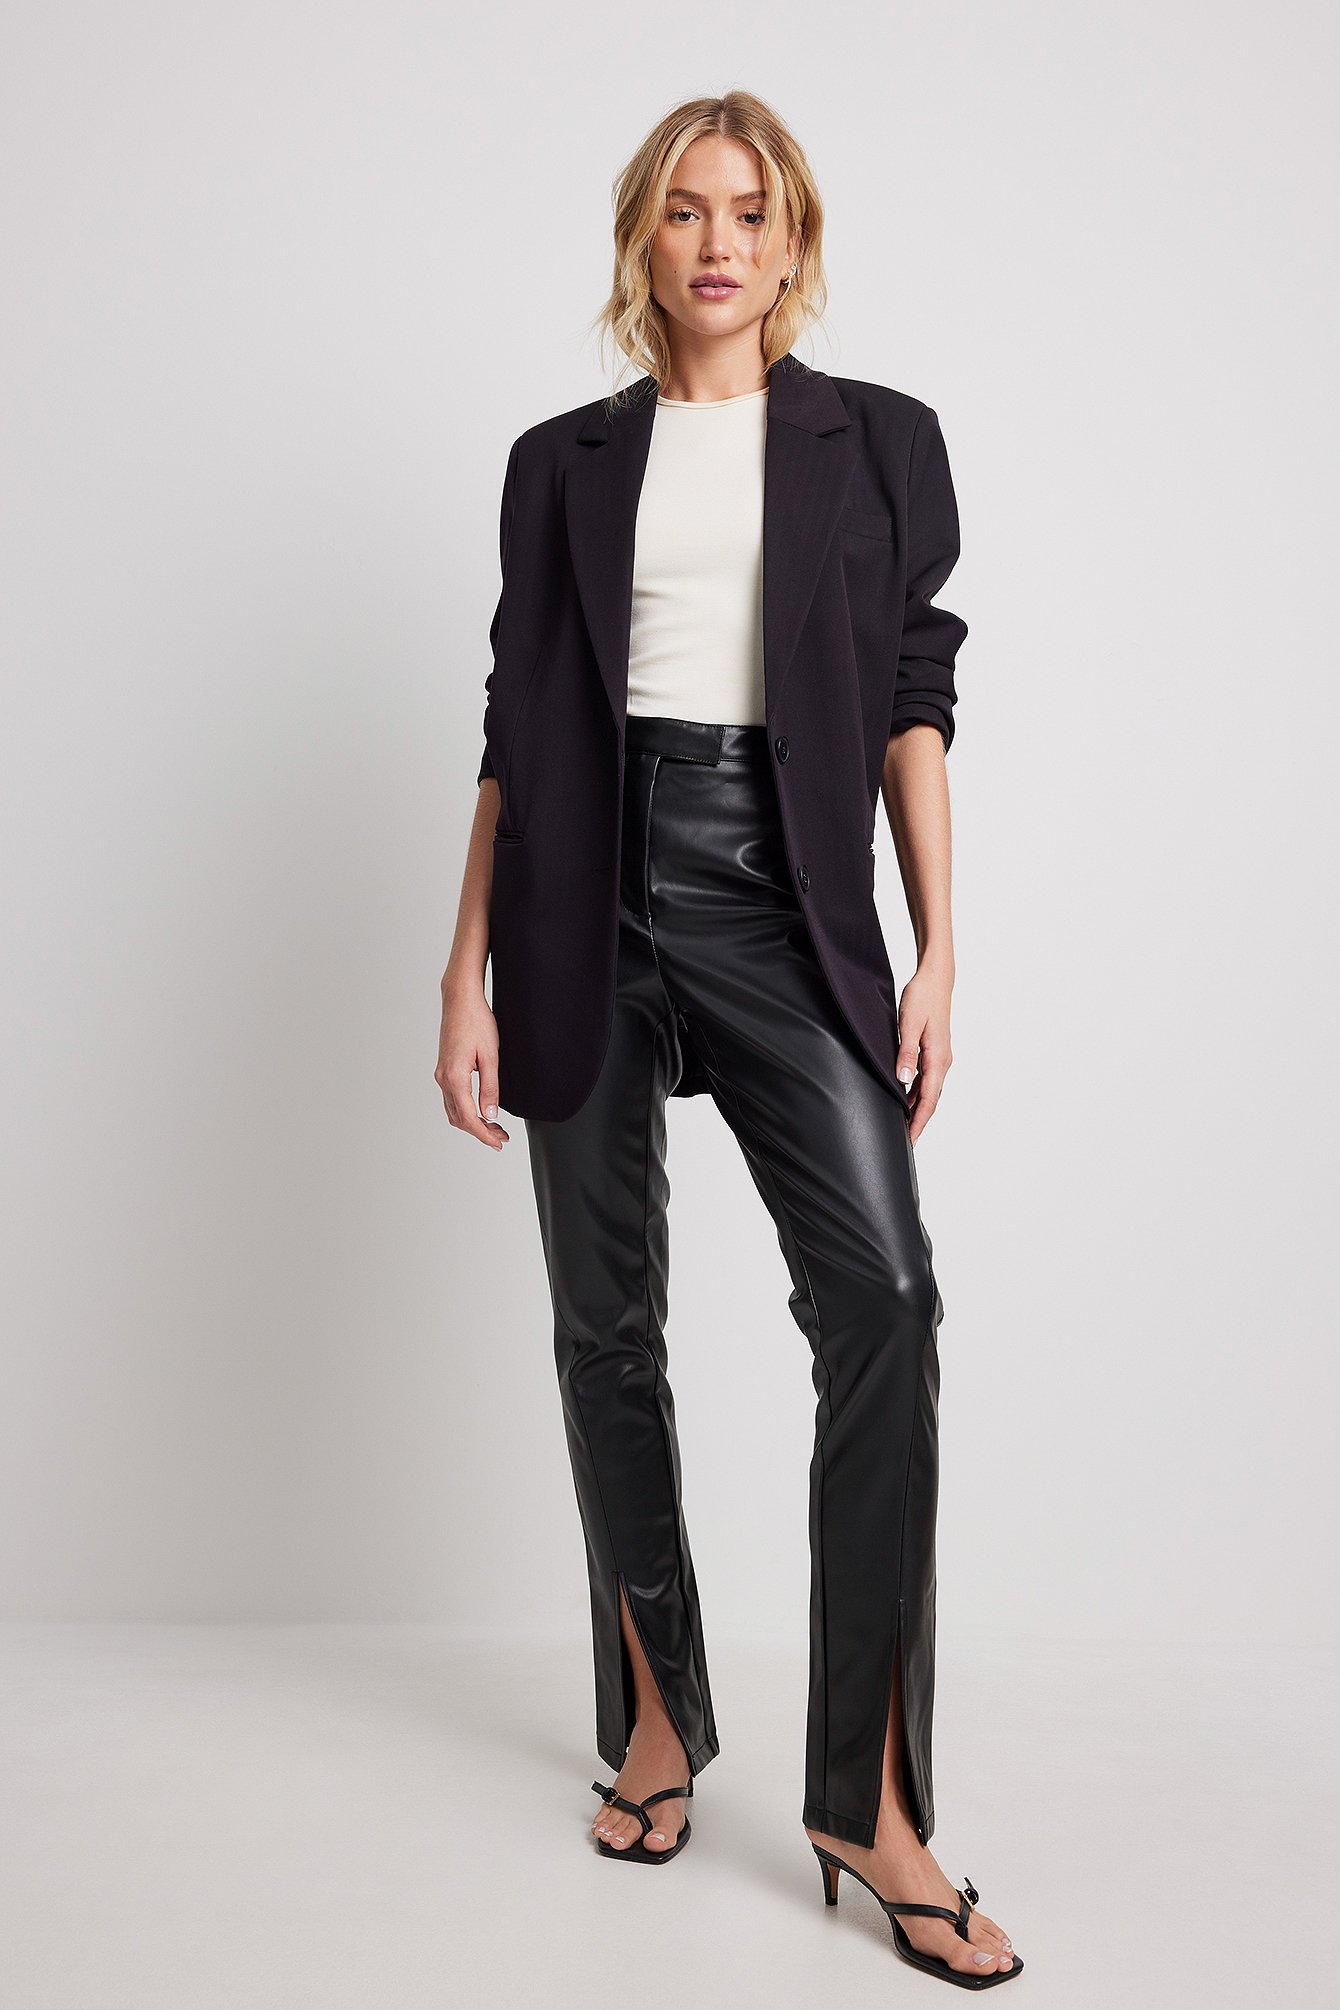 Buy ONLY Women Black Solid Leather Pants  Jeggings for Women 2491939   Myntra